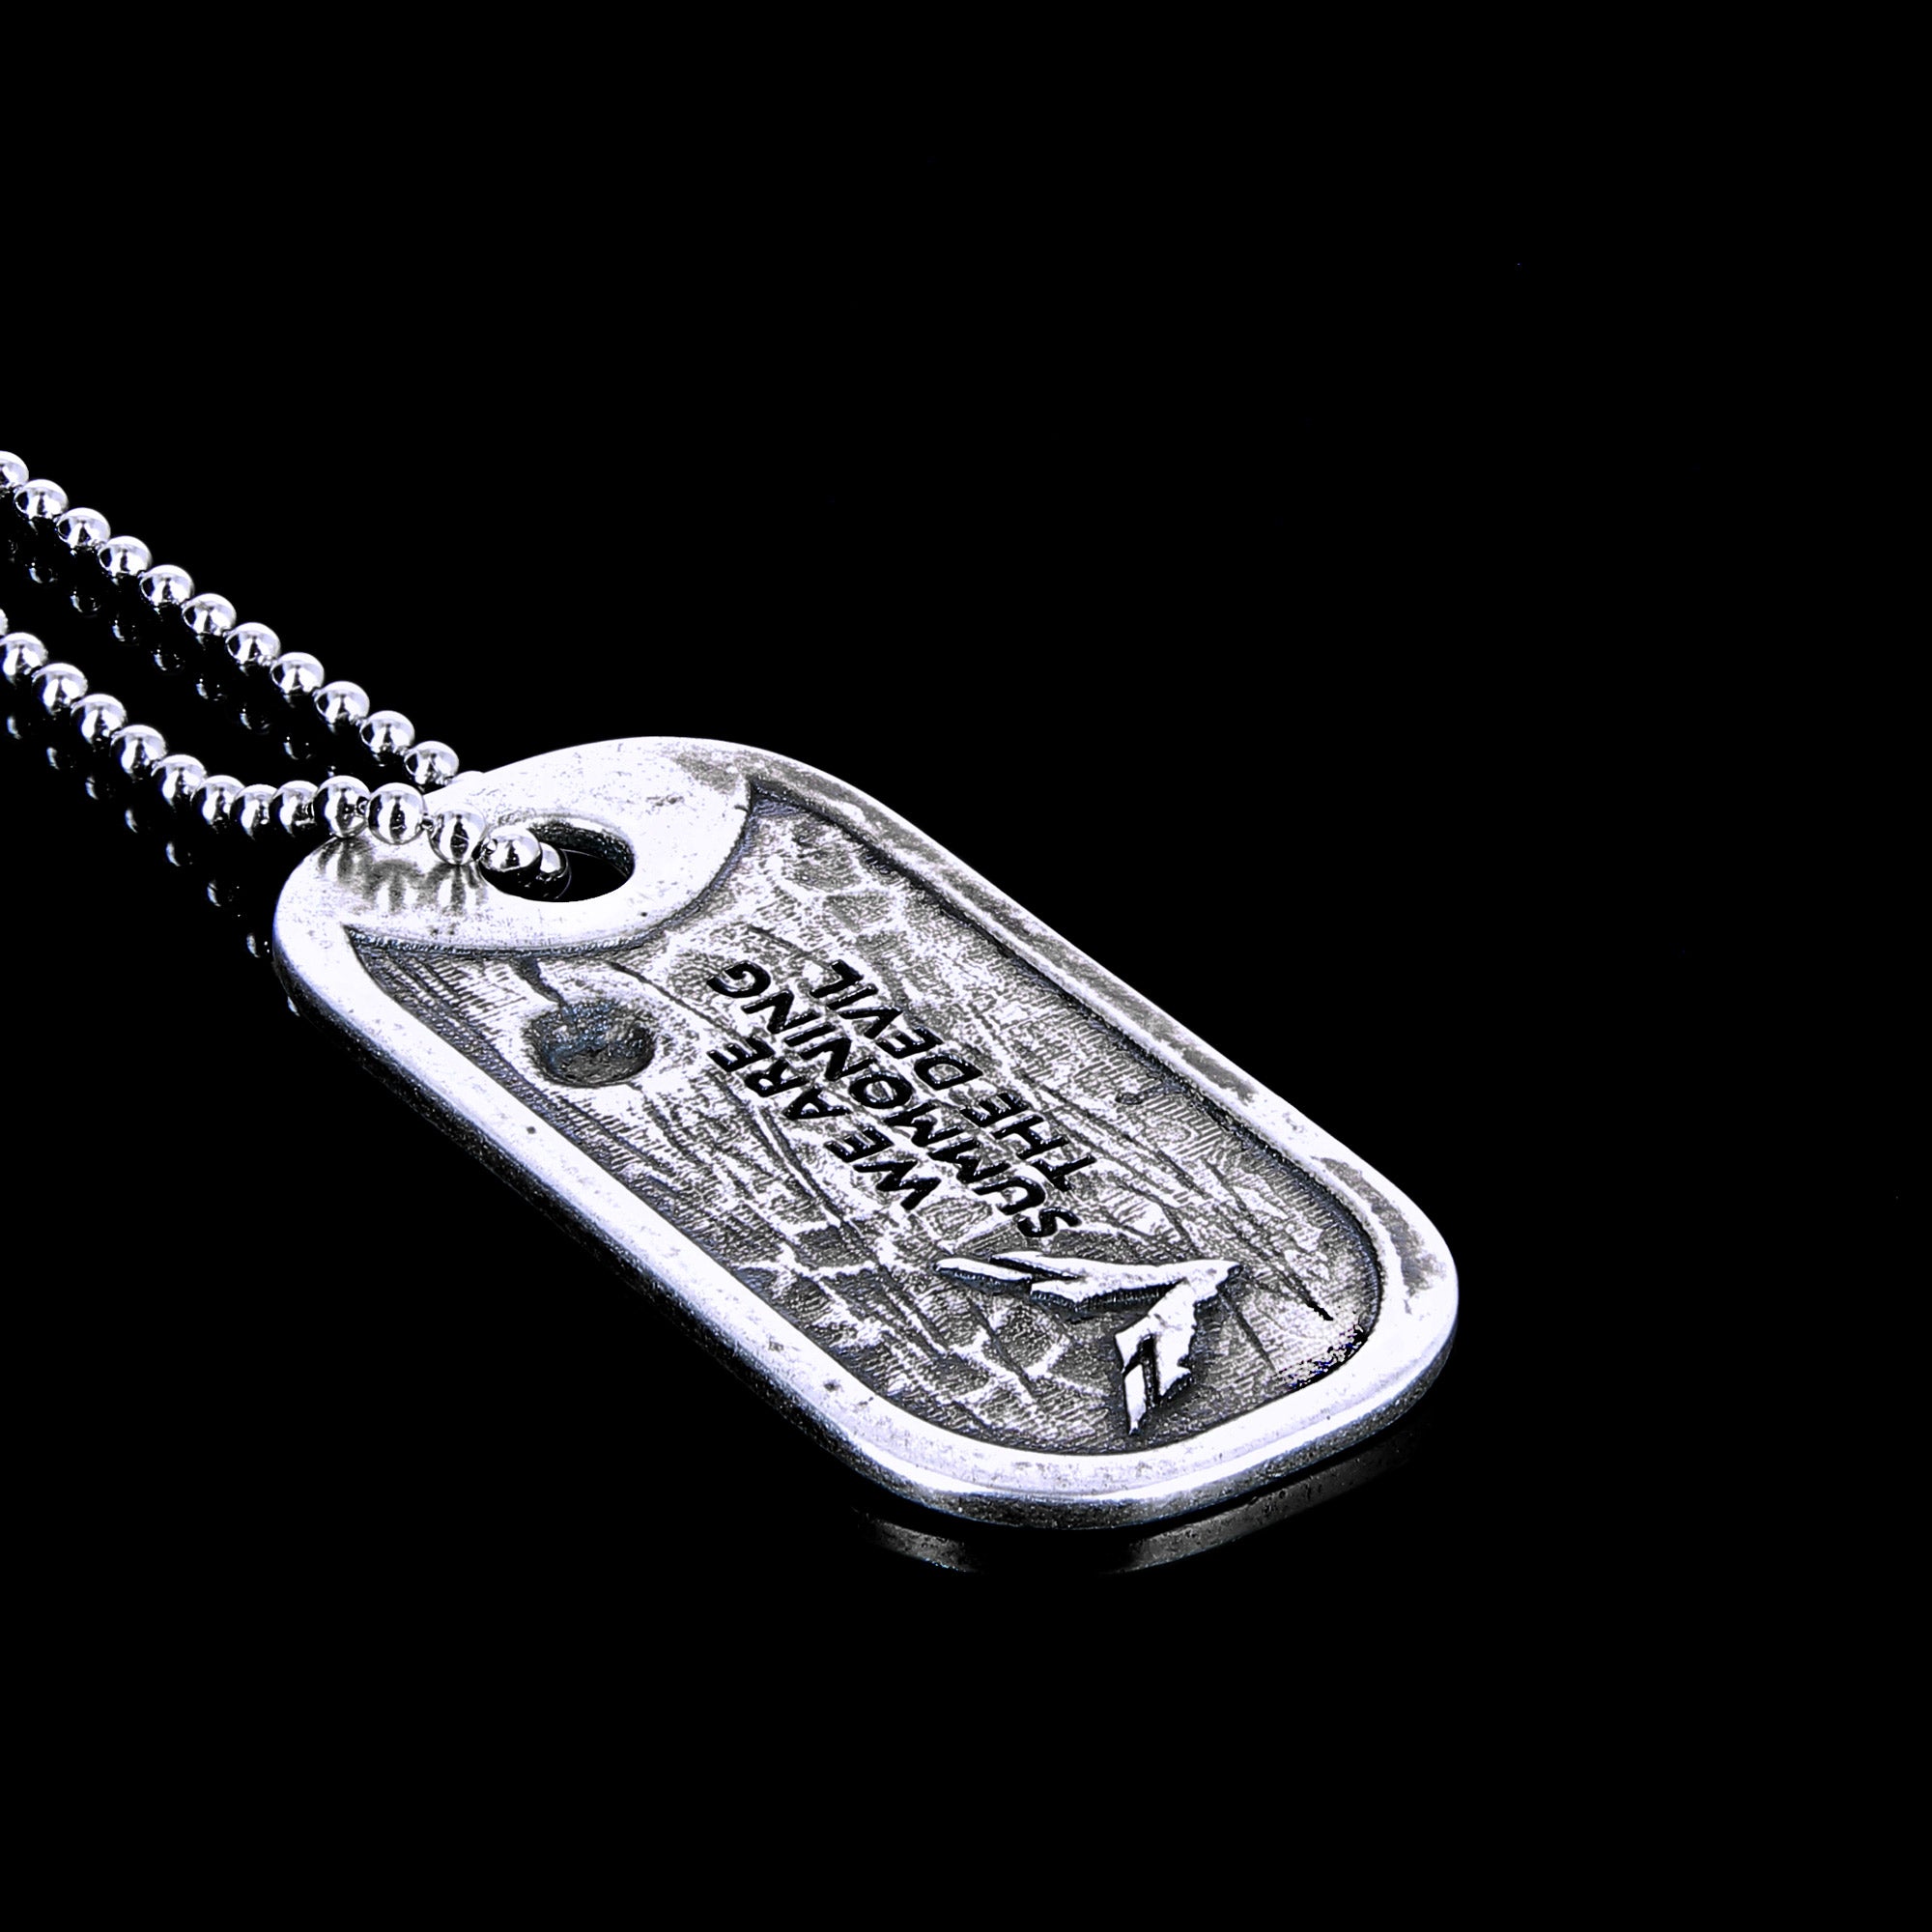 The Lucky Wolves - Dog tag officiel Ghost Recon Breakpoint édition limitée